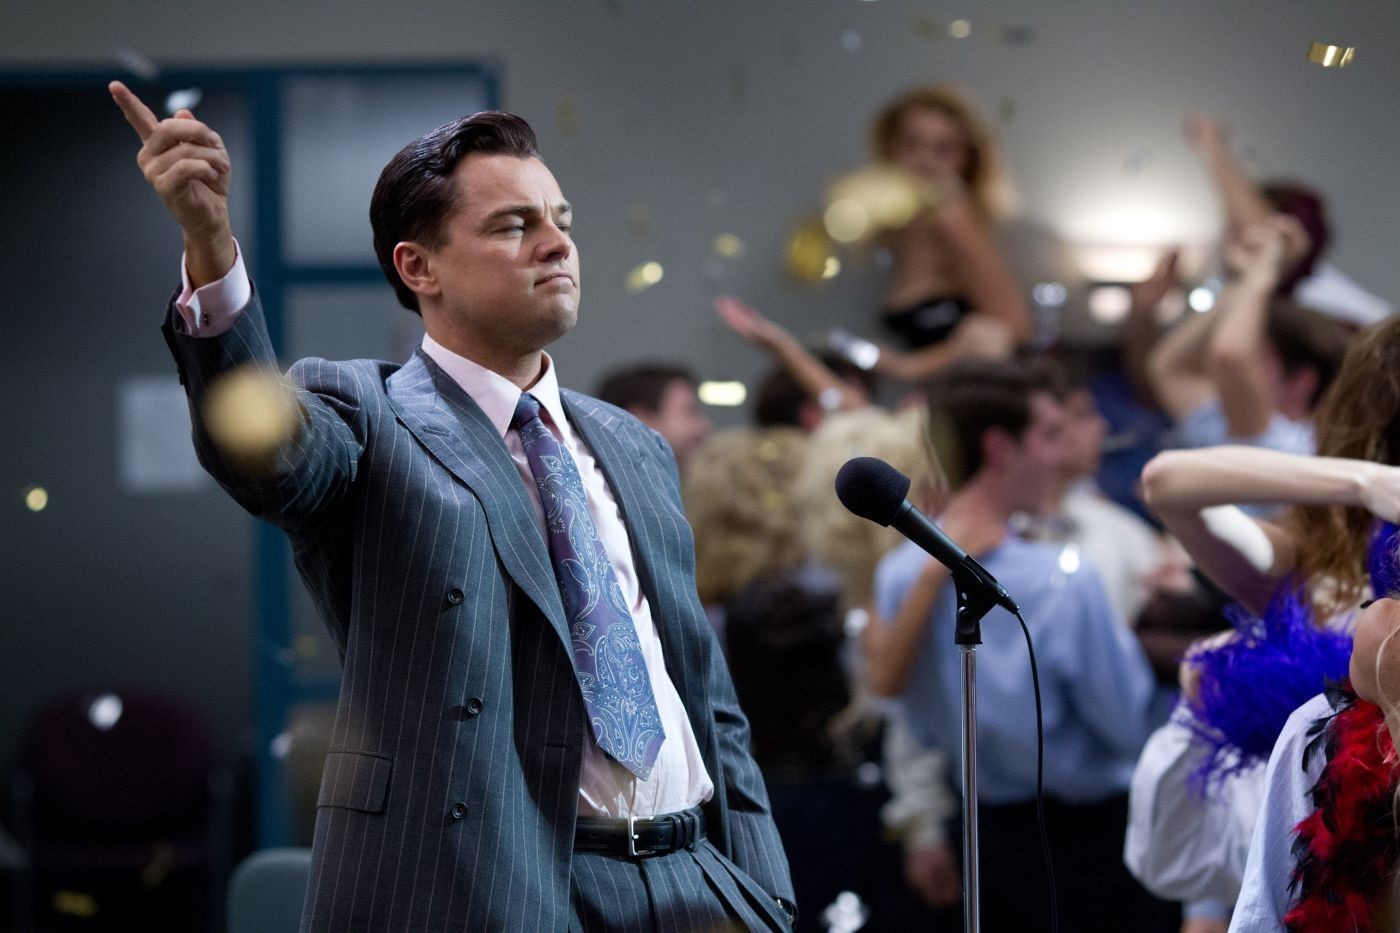 Film Review: The Wolf of Wall Street